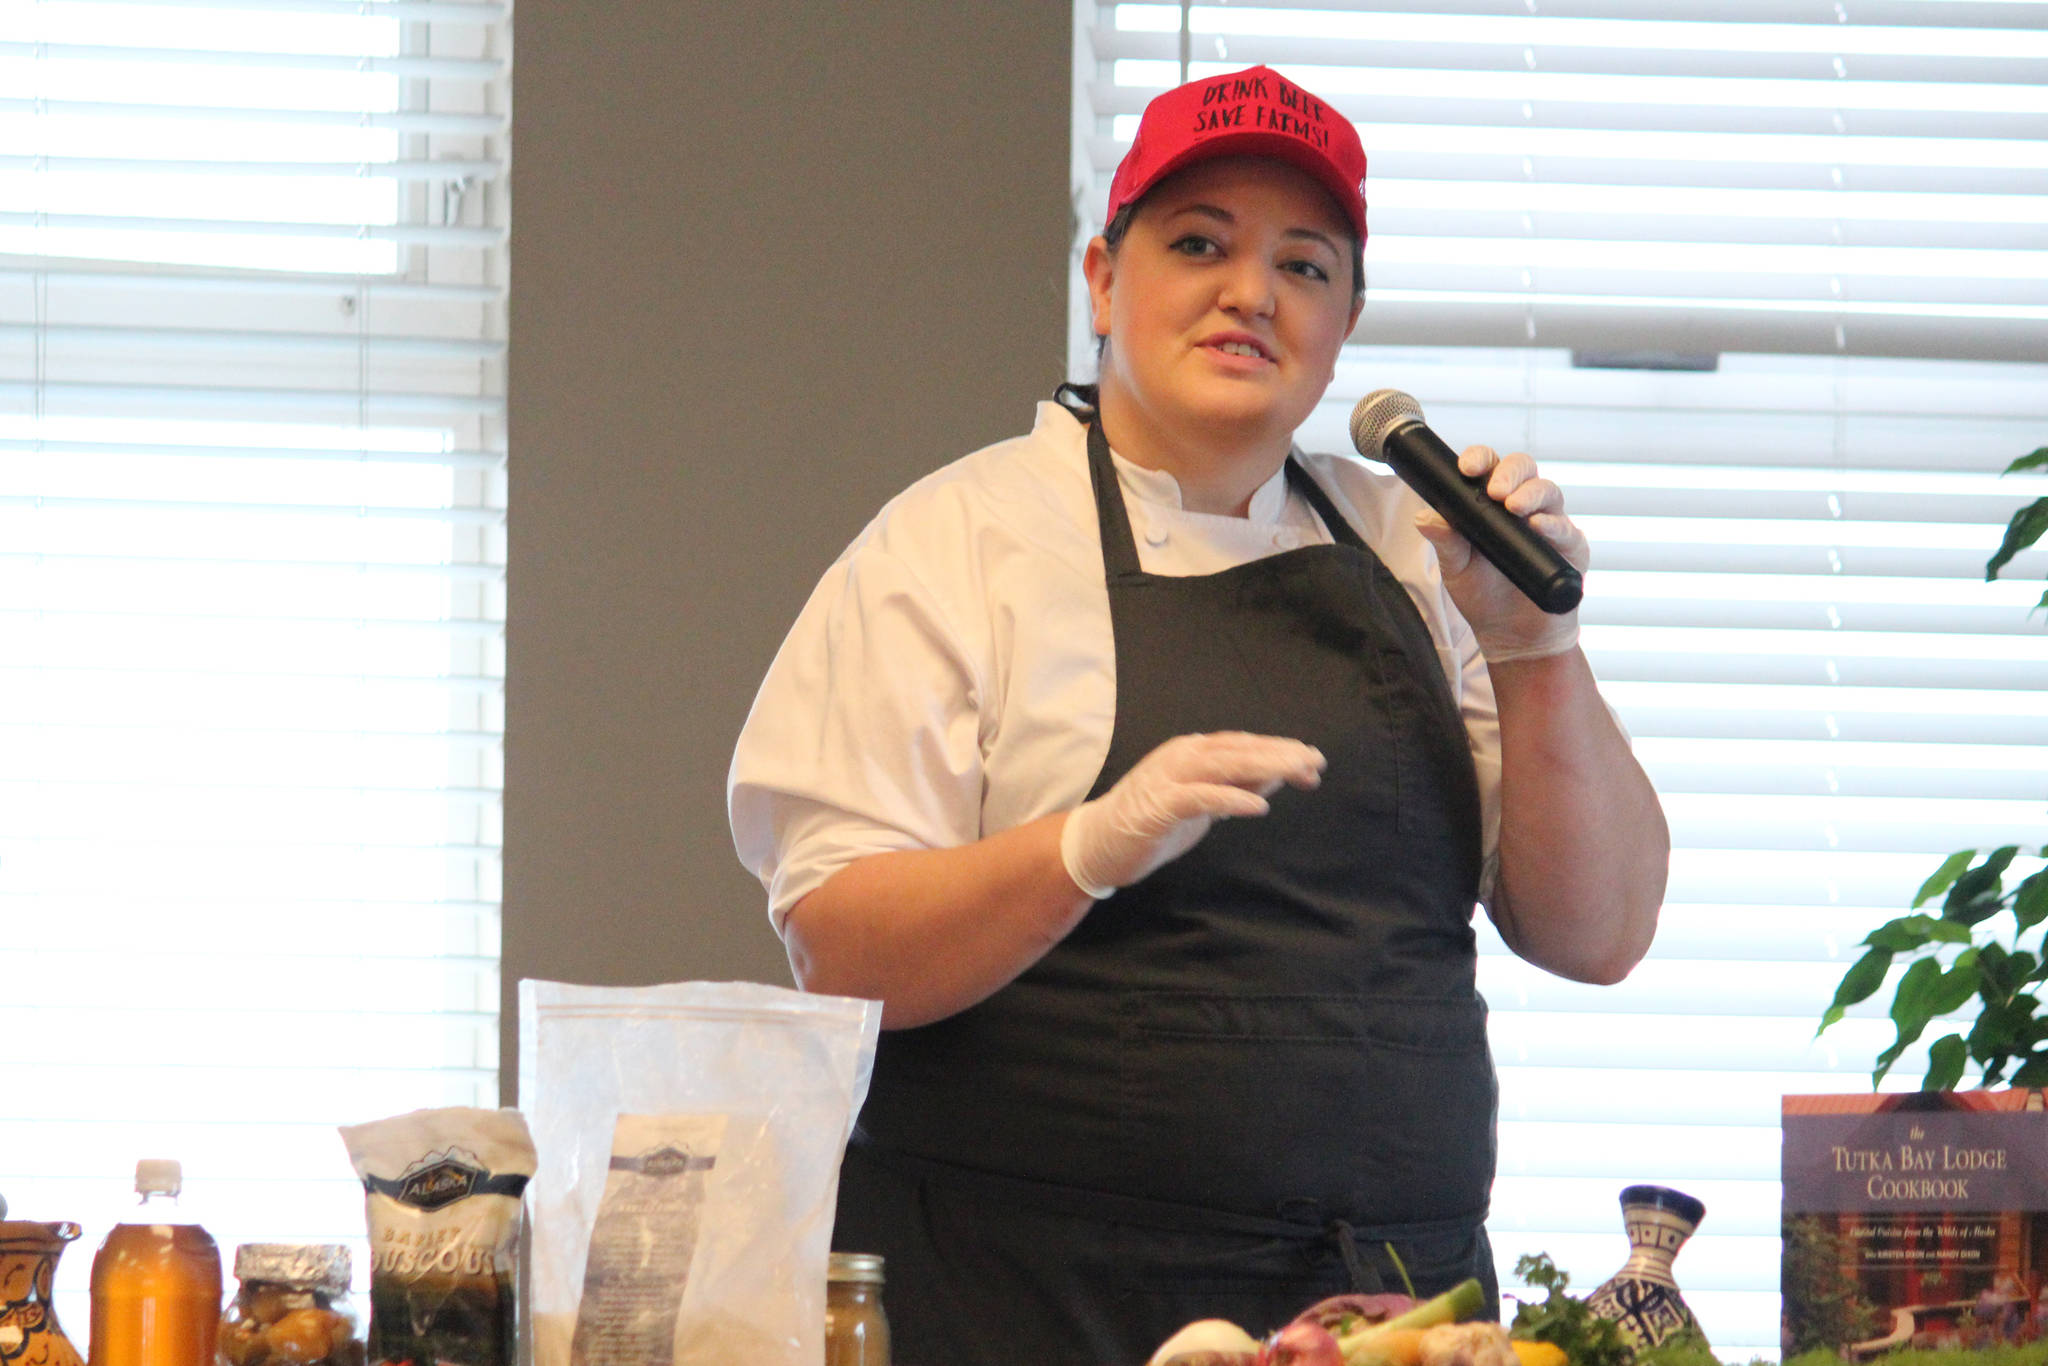 Mandy Dixon, owner of La Baleine, speaks during a cooking demo during the Alaska Food Festival on Saturday, March 9, 2019 at Land’s End Resort in Homer, Alaska. She and her mother, Kirseten, who owns Tutka Bay Lodge, spoke about their travels to other countries and how that inspires their cooking in Alaska. (Photo by Megan Pacer/Homer News)